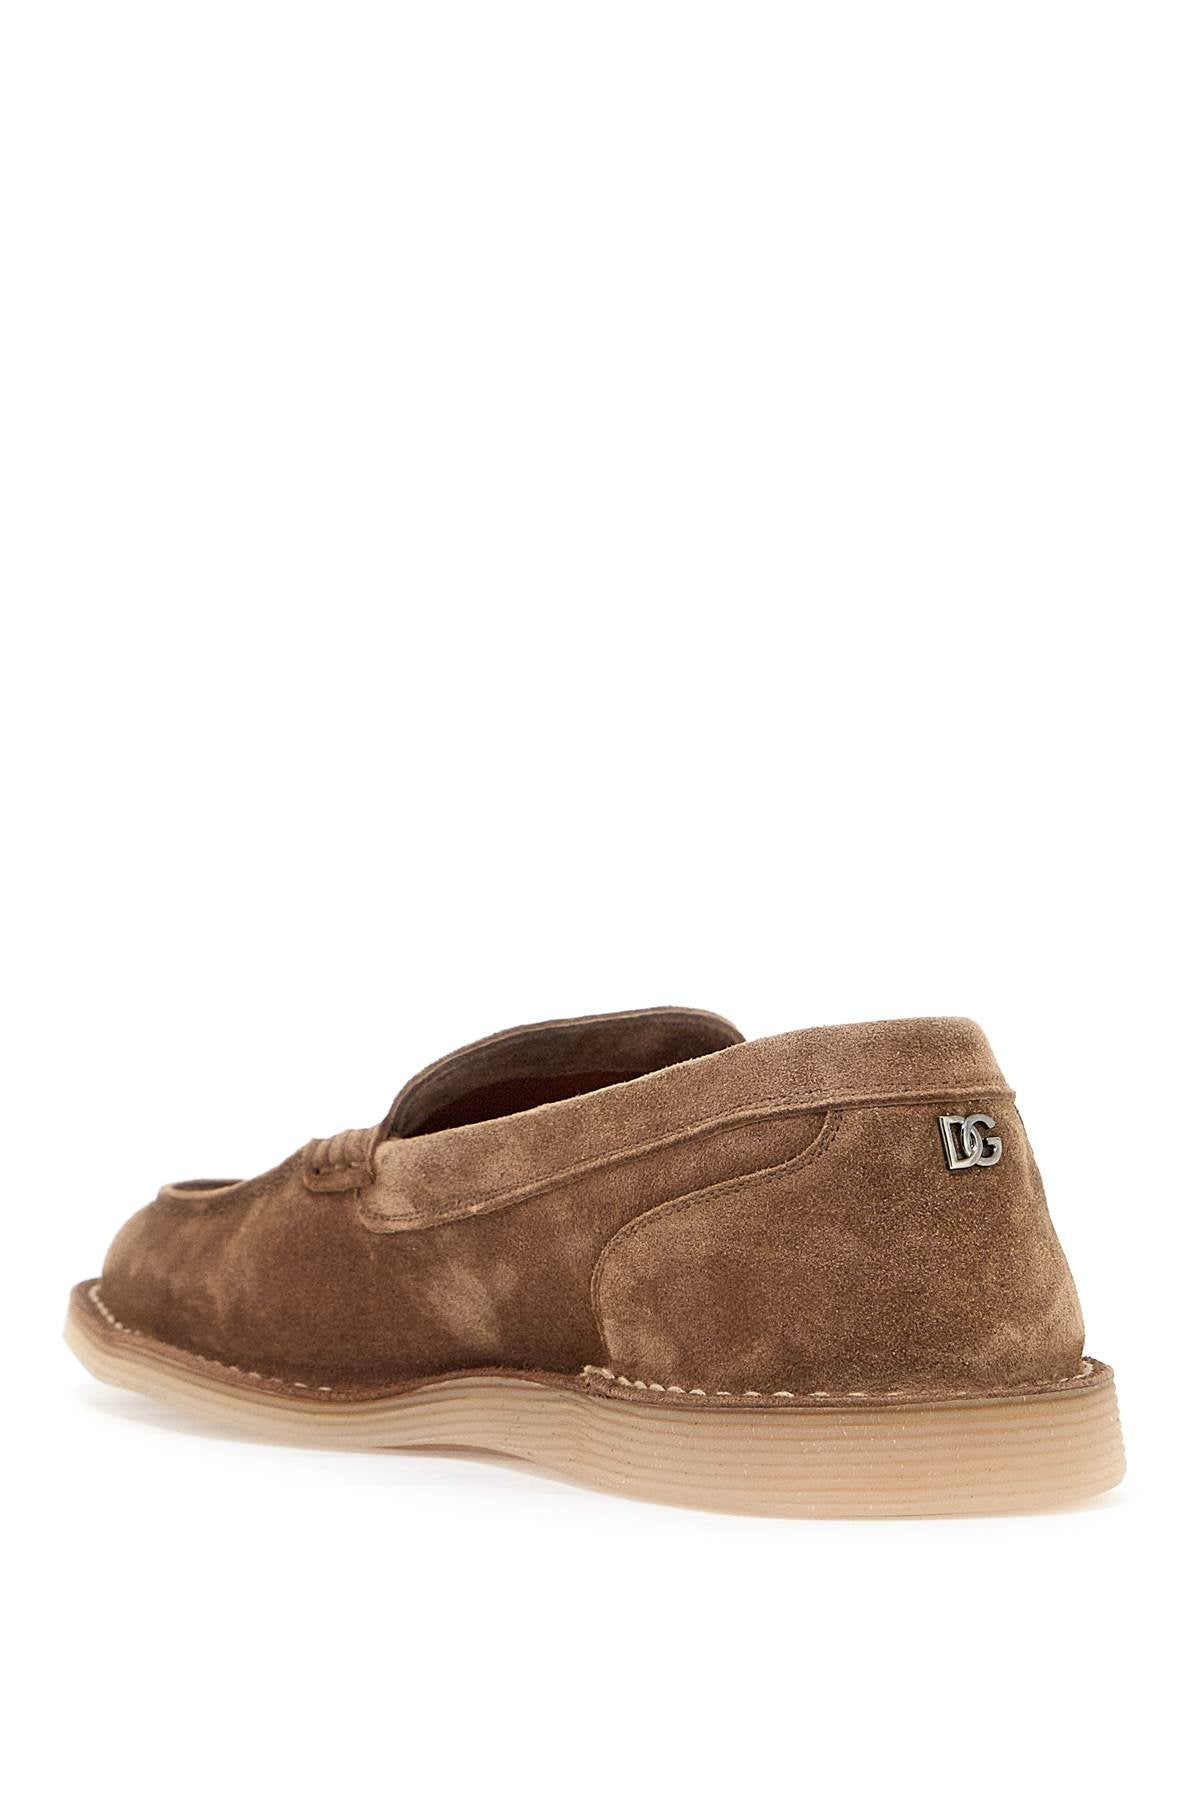 Dolce & Gabbana Suede Leather Moccas Men - 3